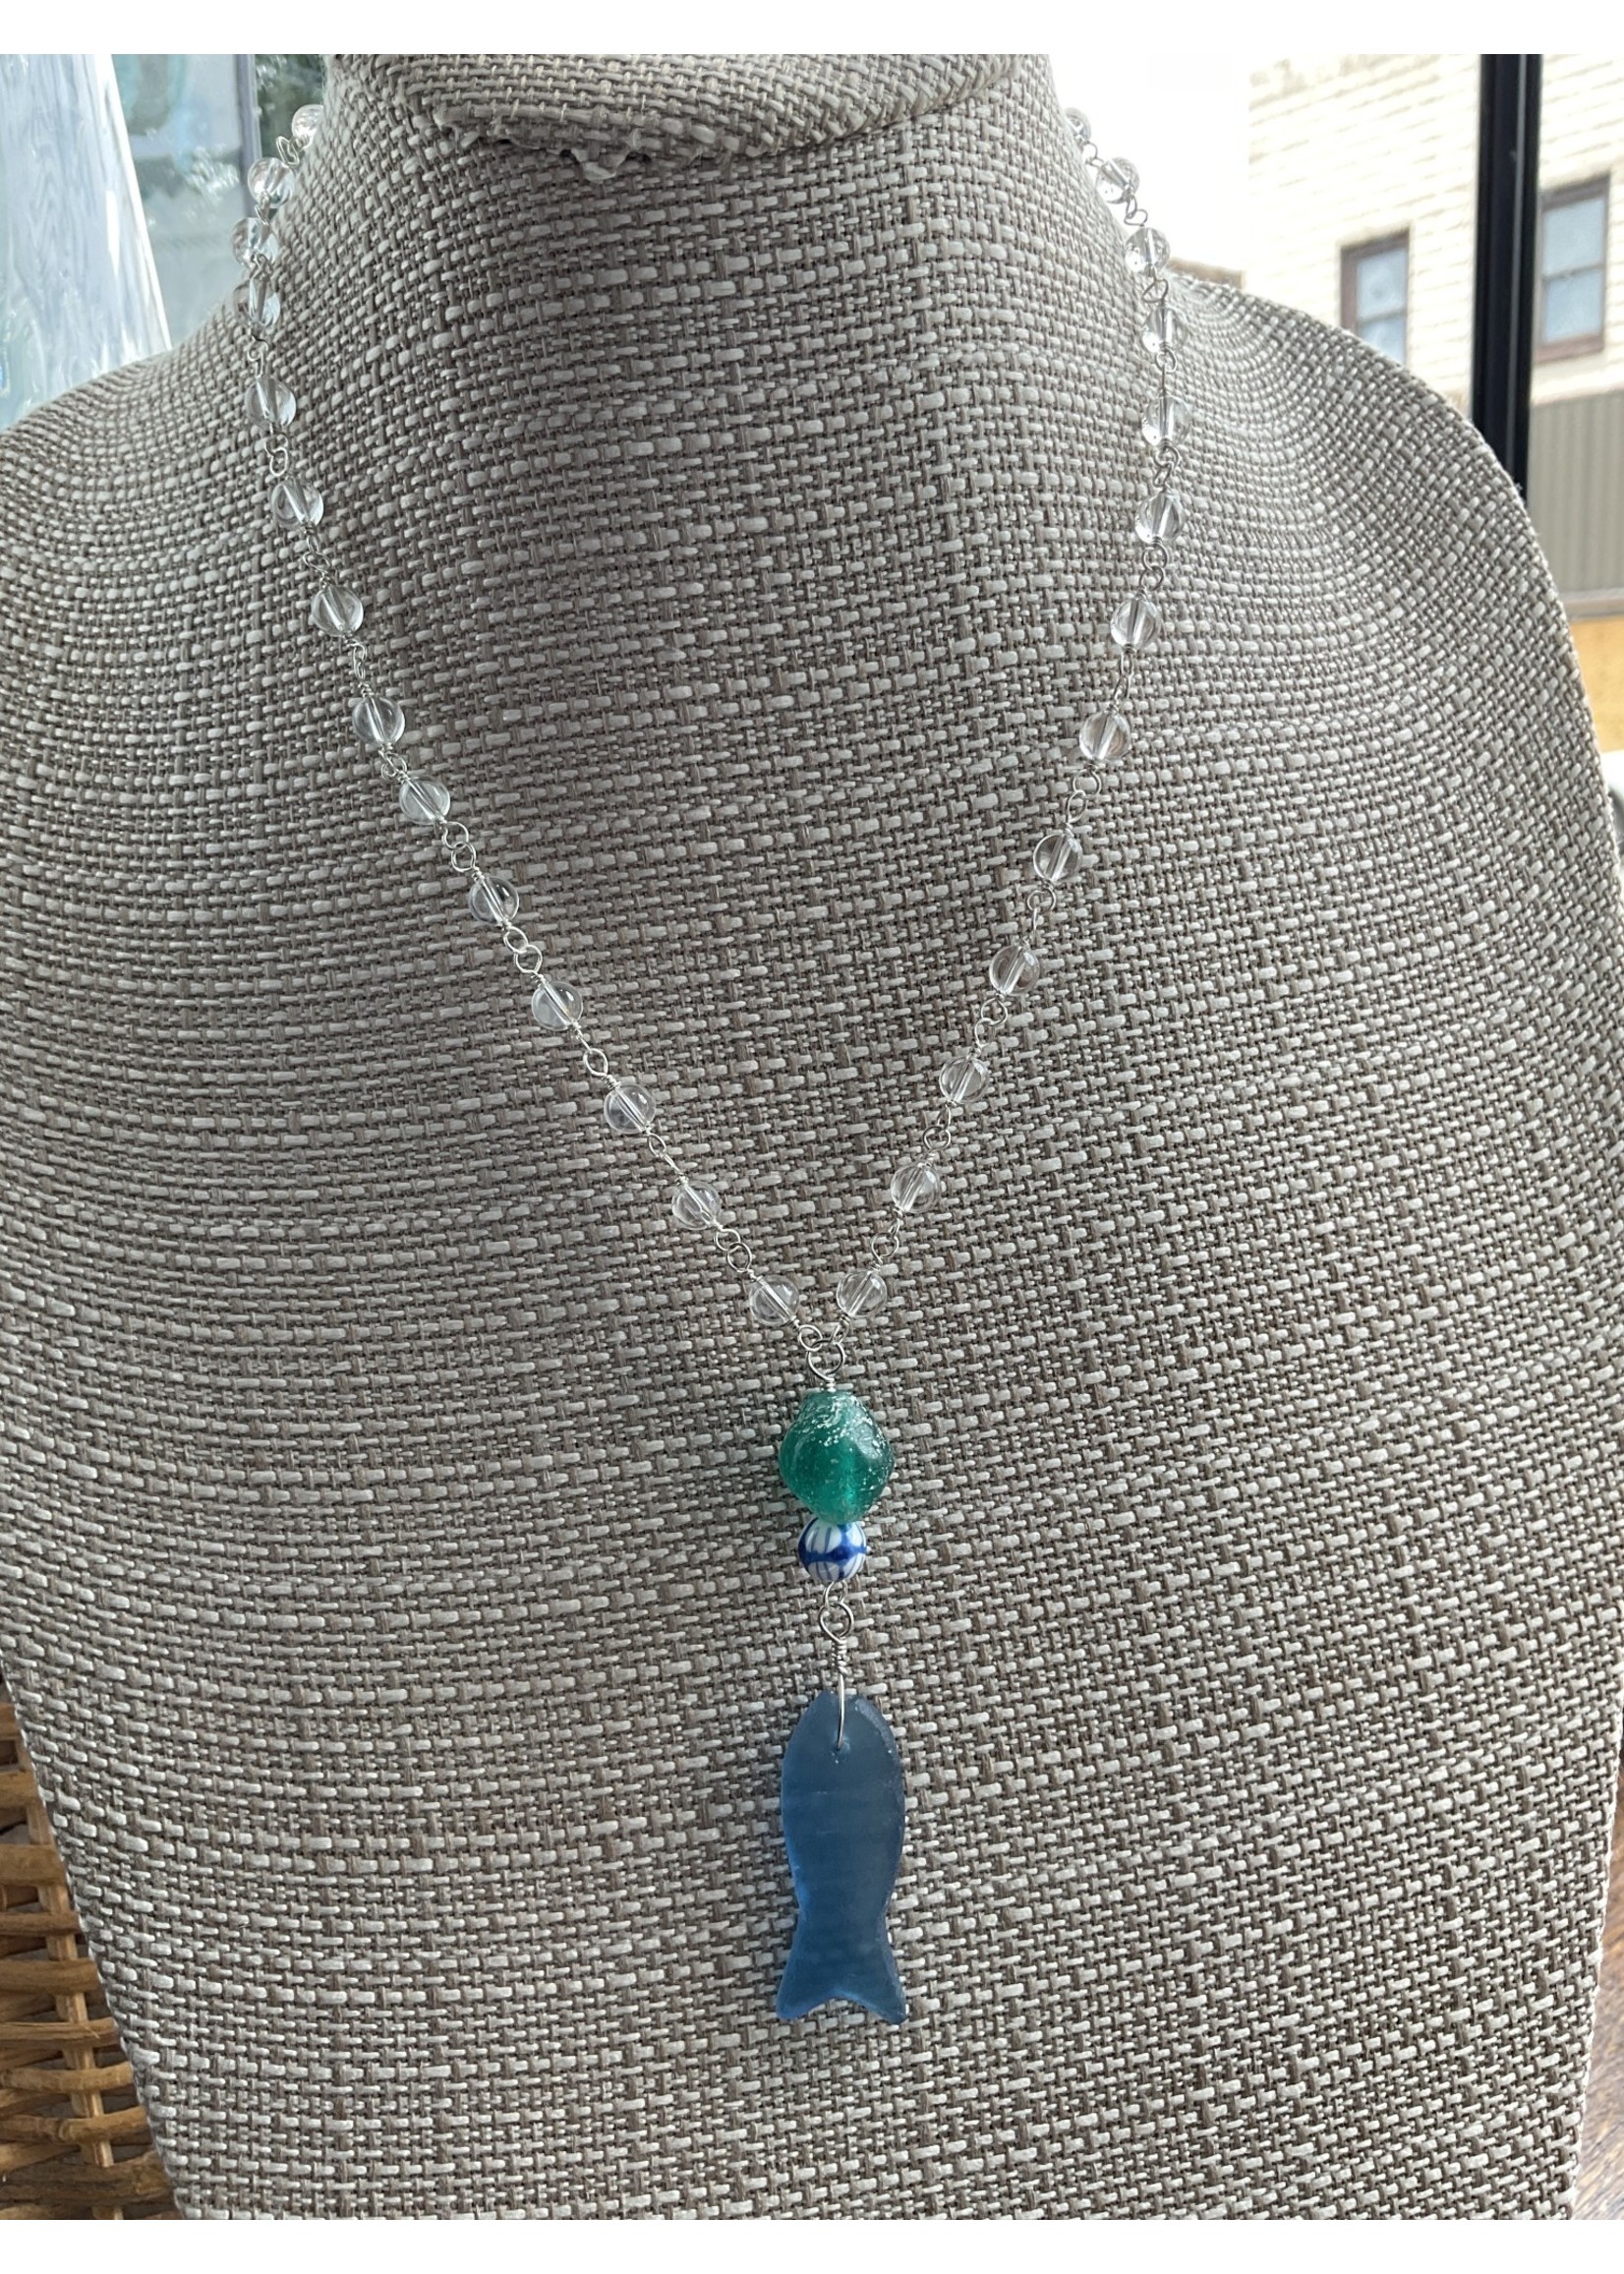 Wendy Perry Designs Sterling Blue Sea Glass Necklace